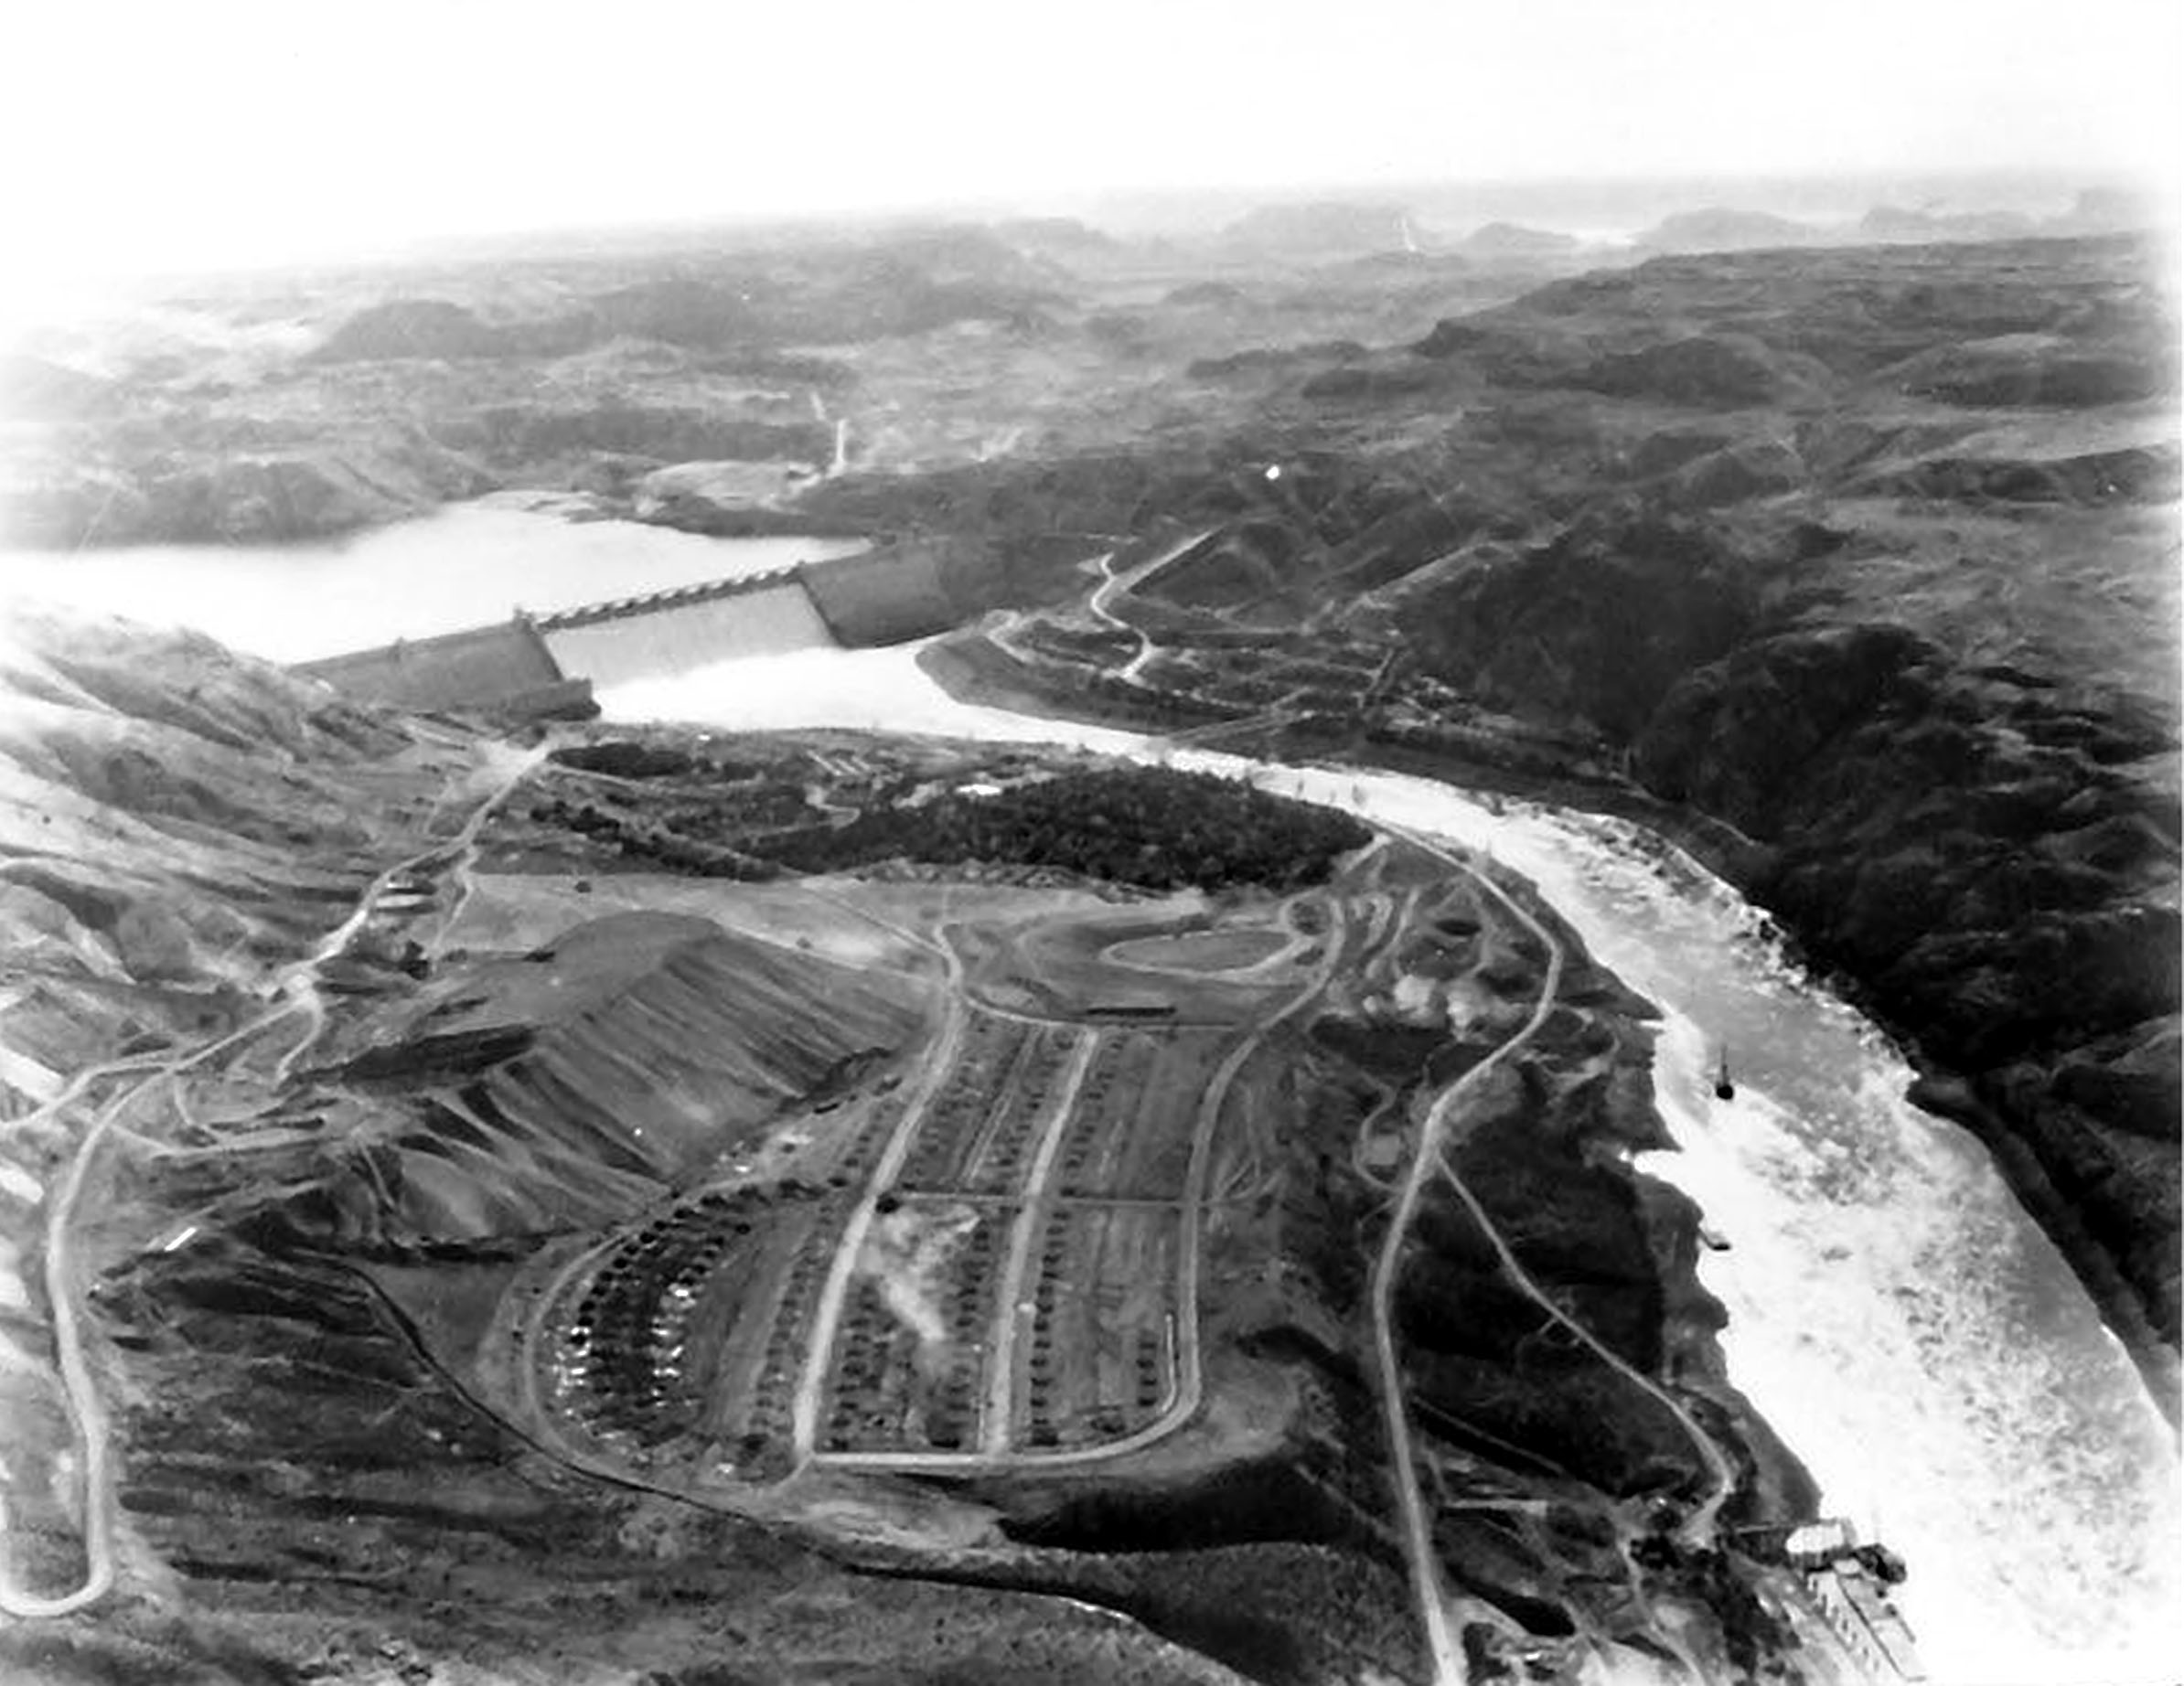 September 19, 1946. Mason City (Coulee Dam) in foreground with Engineers Town across river and Grand Coulee top center.